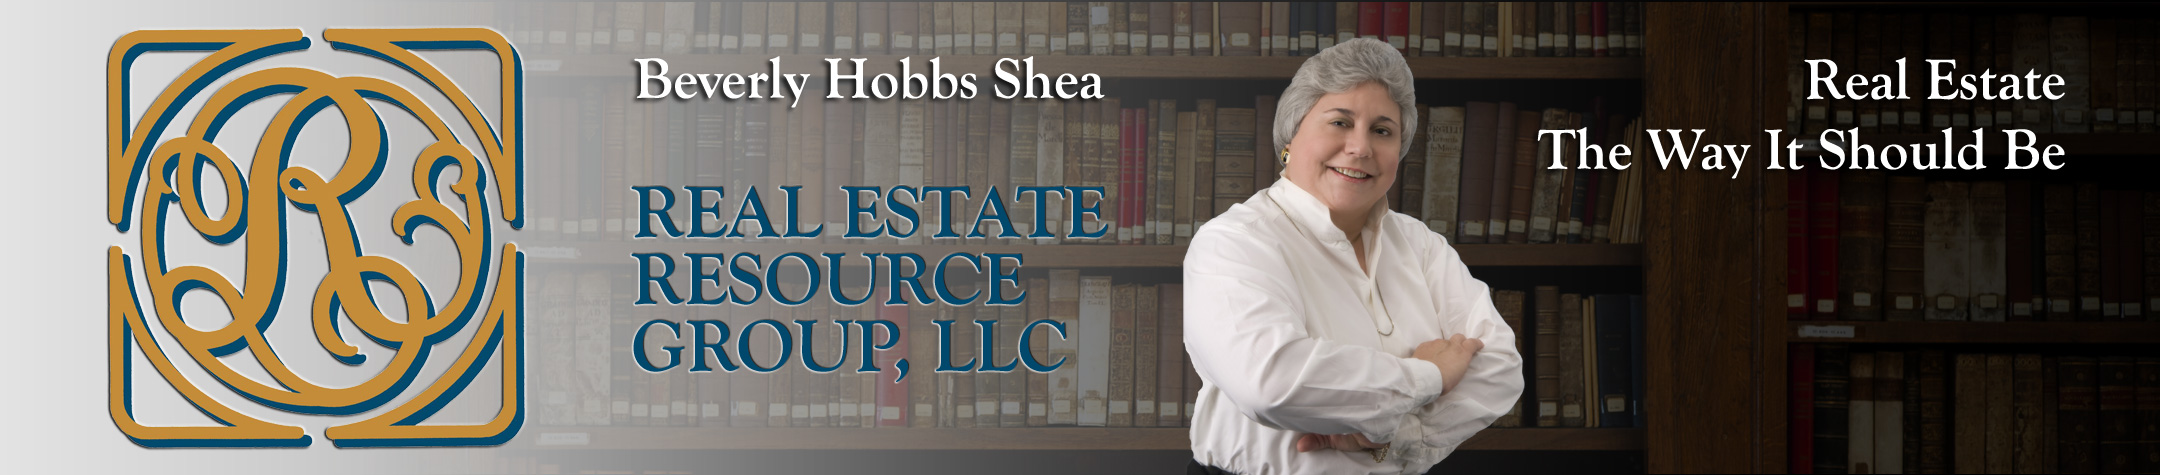 Real Estate Professional Beverly Hobbs Shea of Real Estate Resource Group, LLC